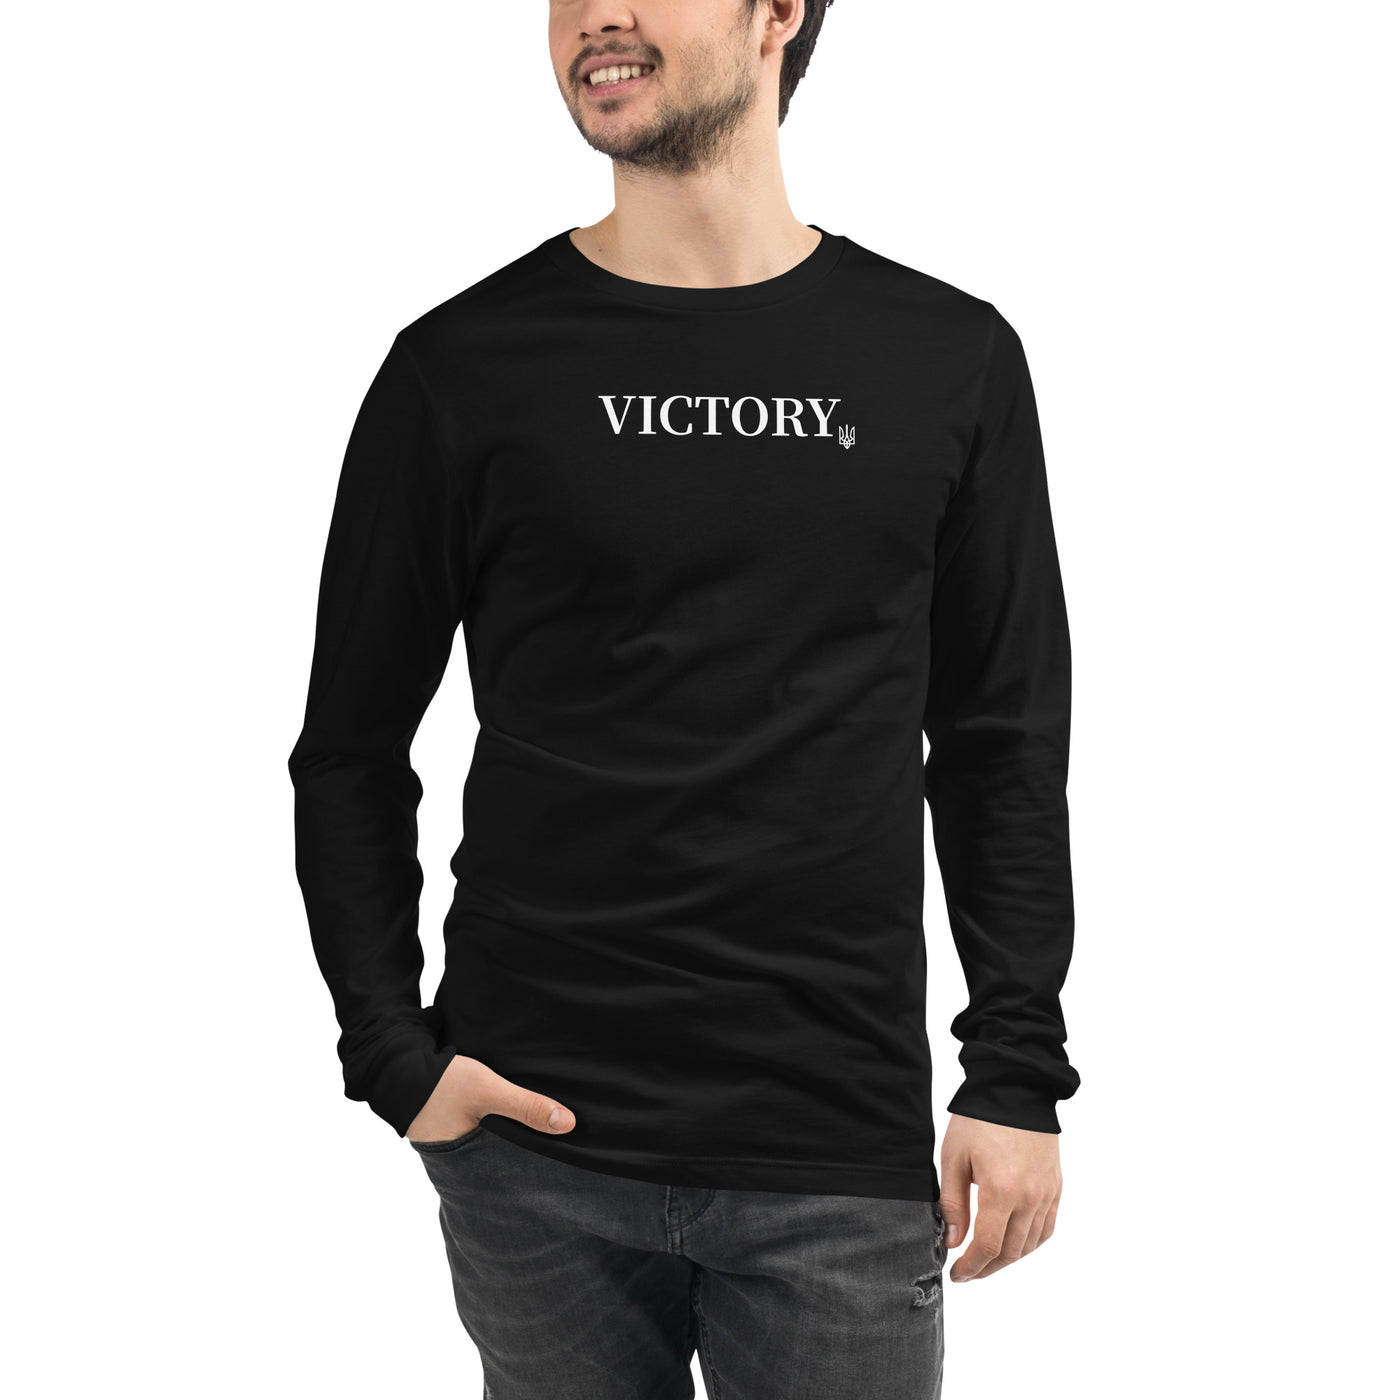 Victory Long Sleeve Shirt Embroidery